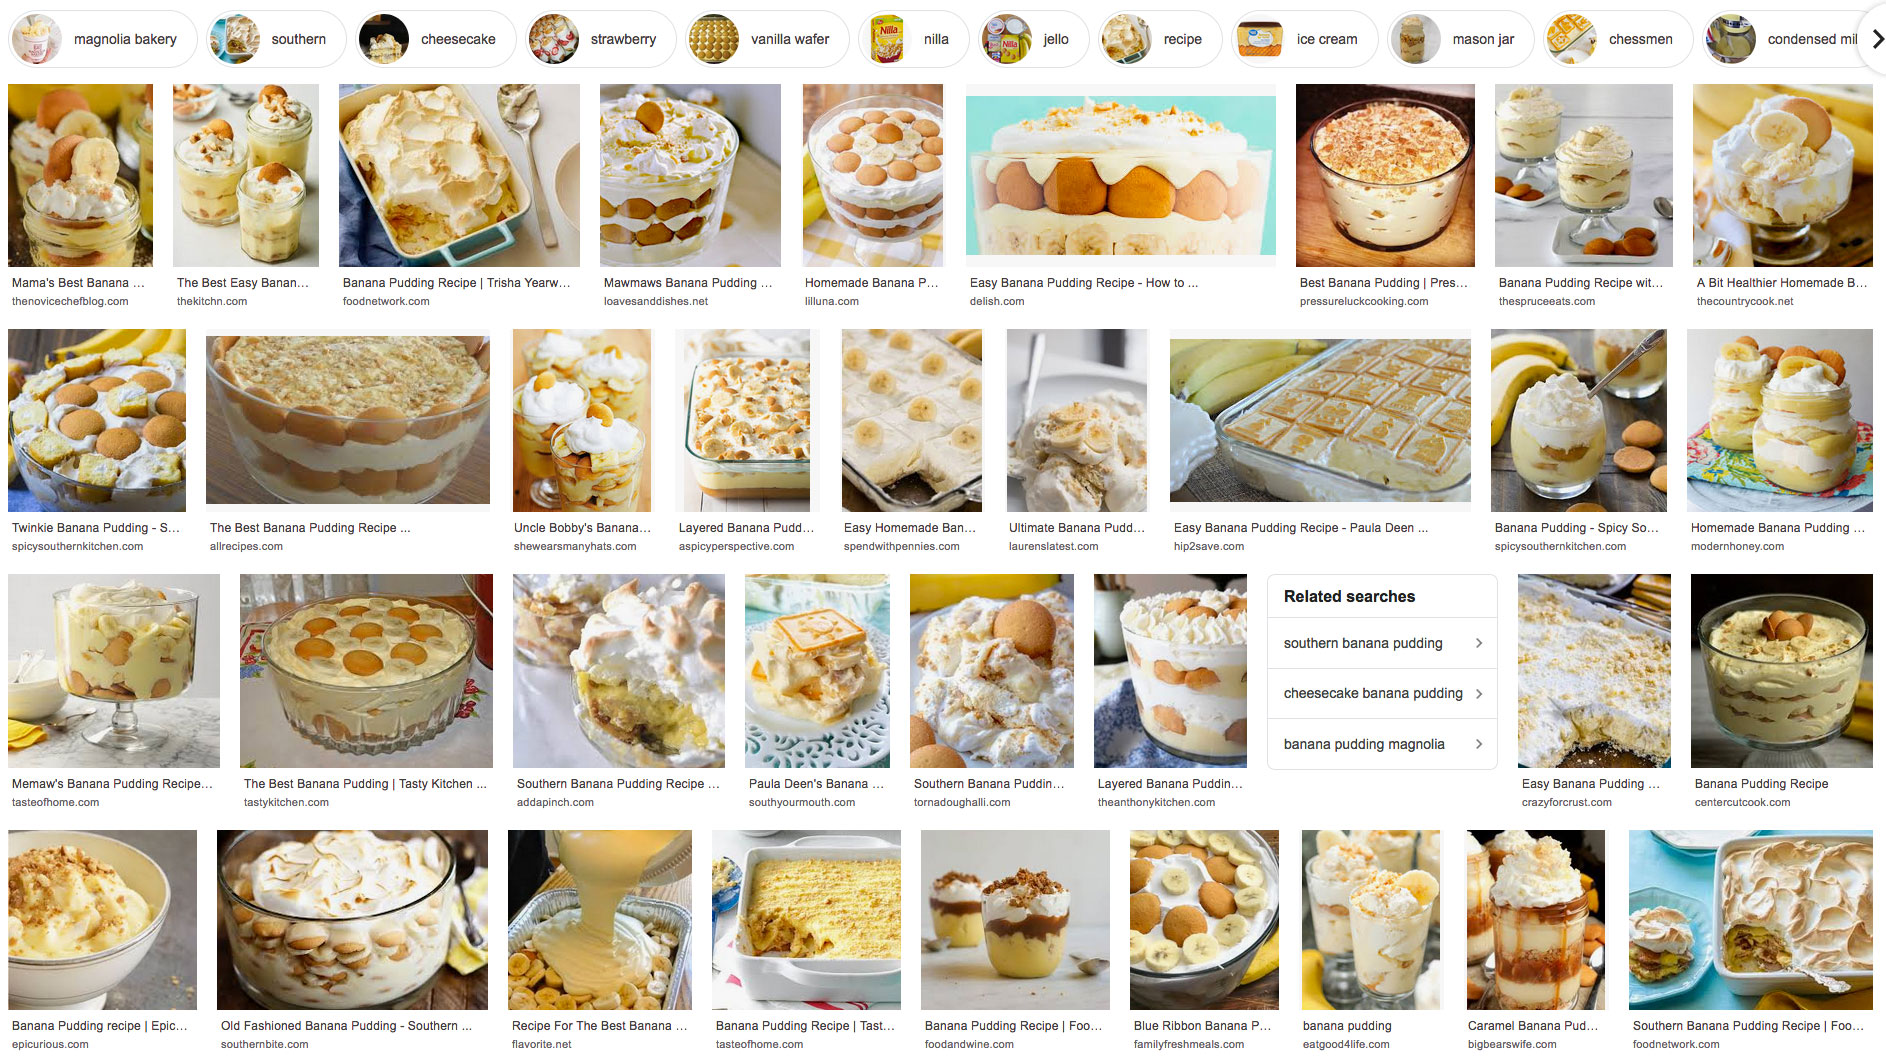 5 Essential Desserts - These are some of my favorite desserts.  (Banana Pudding Google Screenshot)